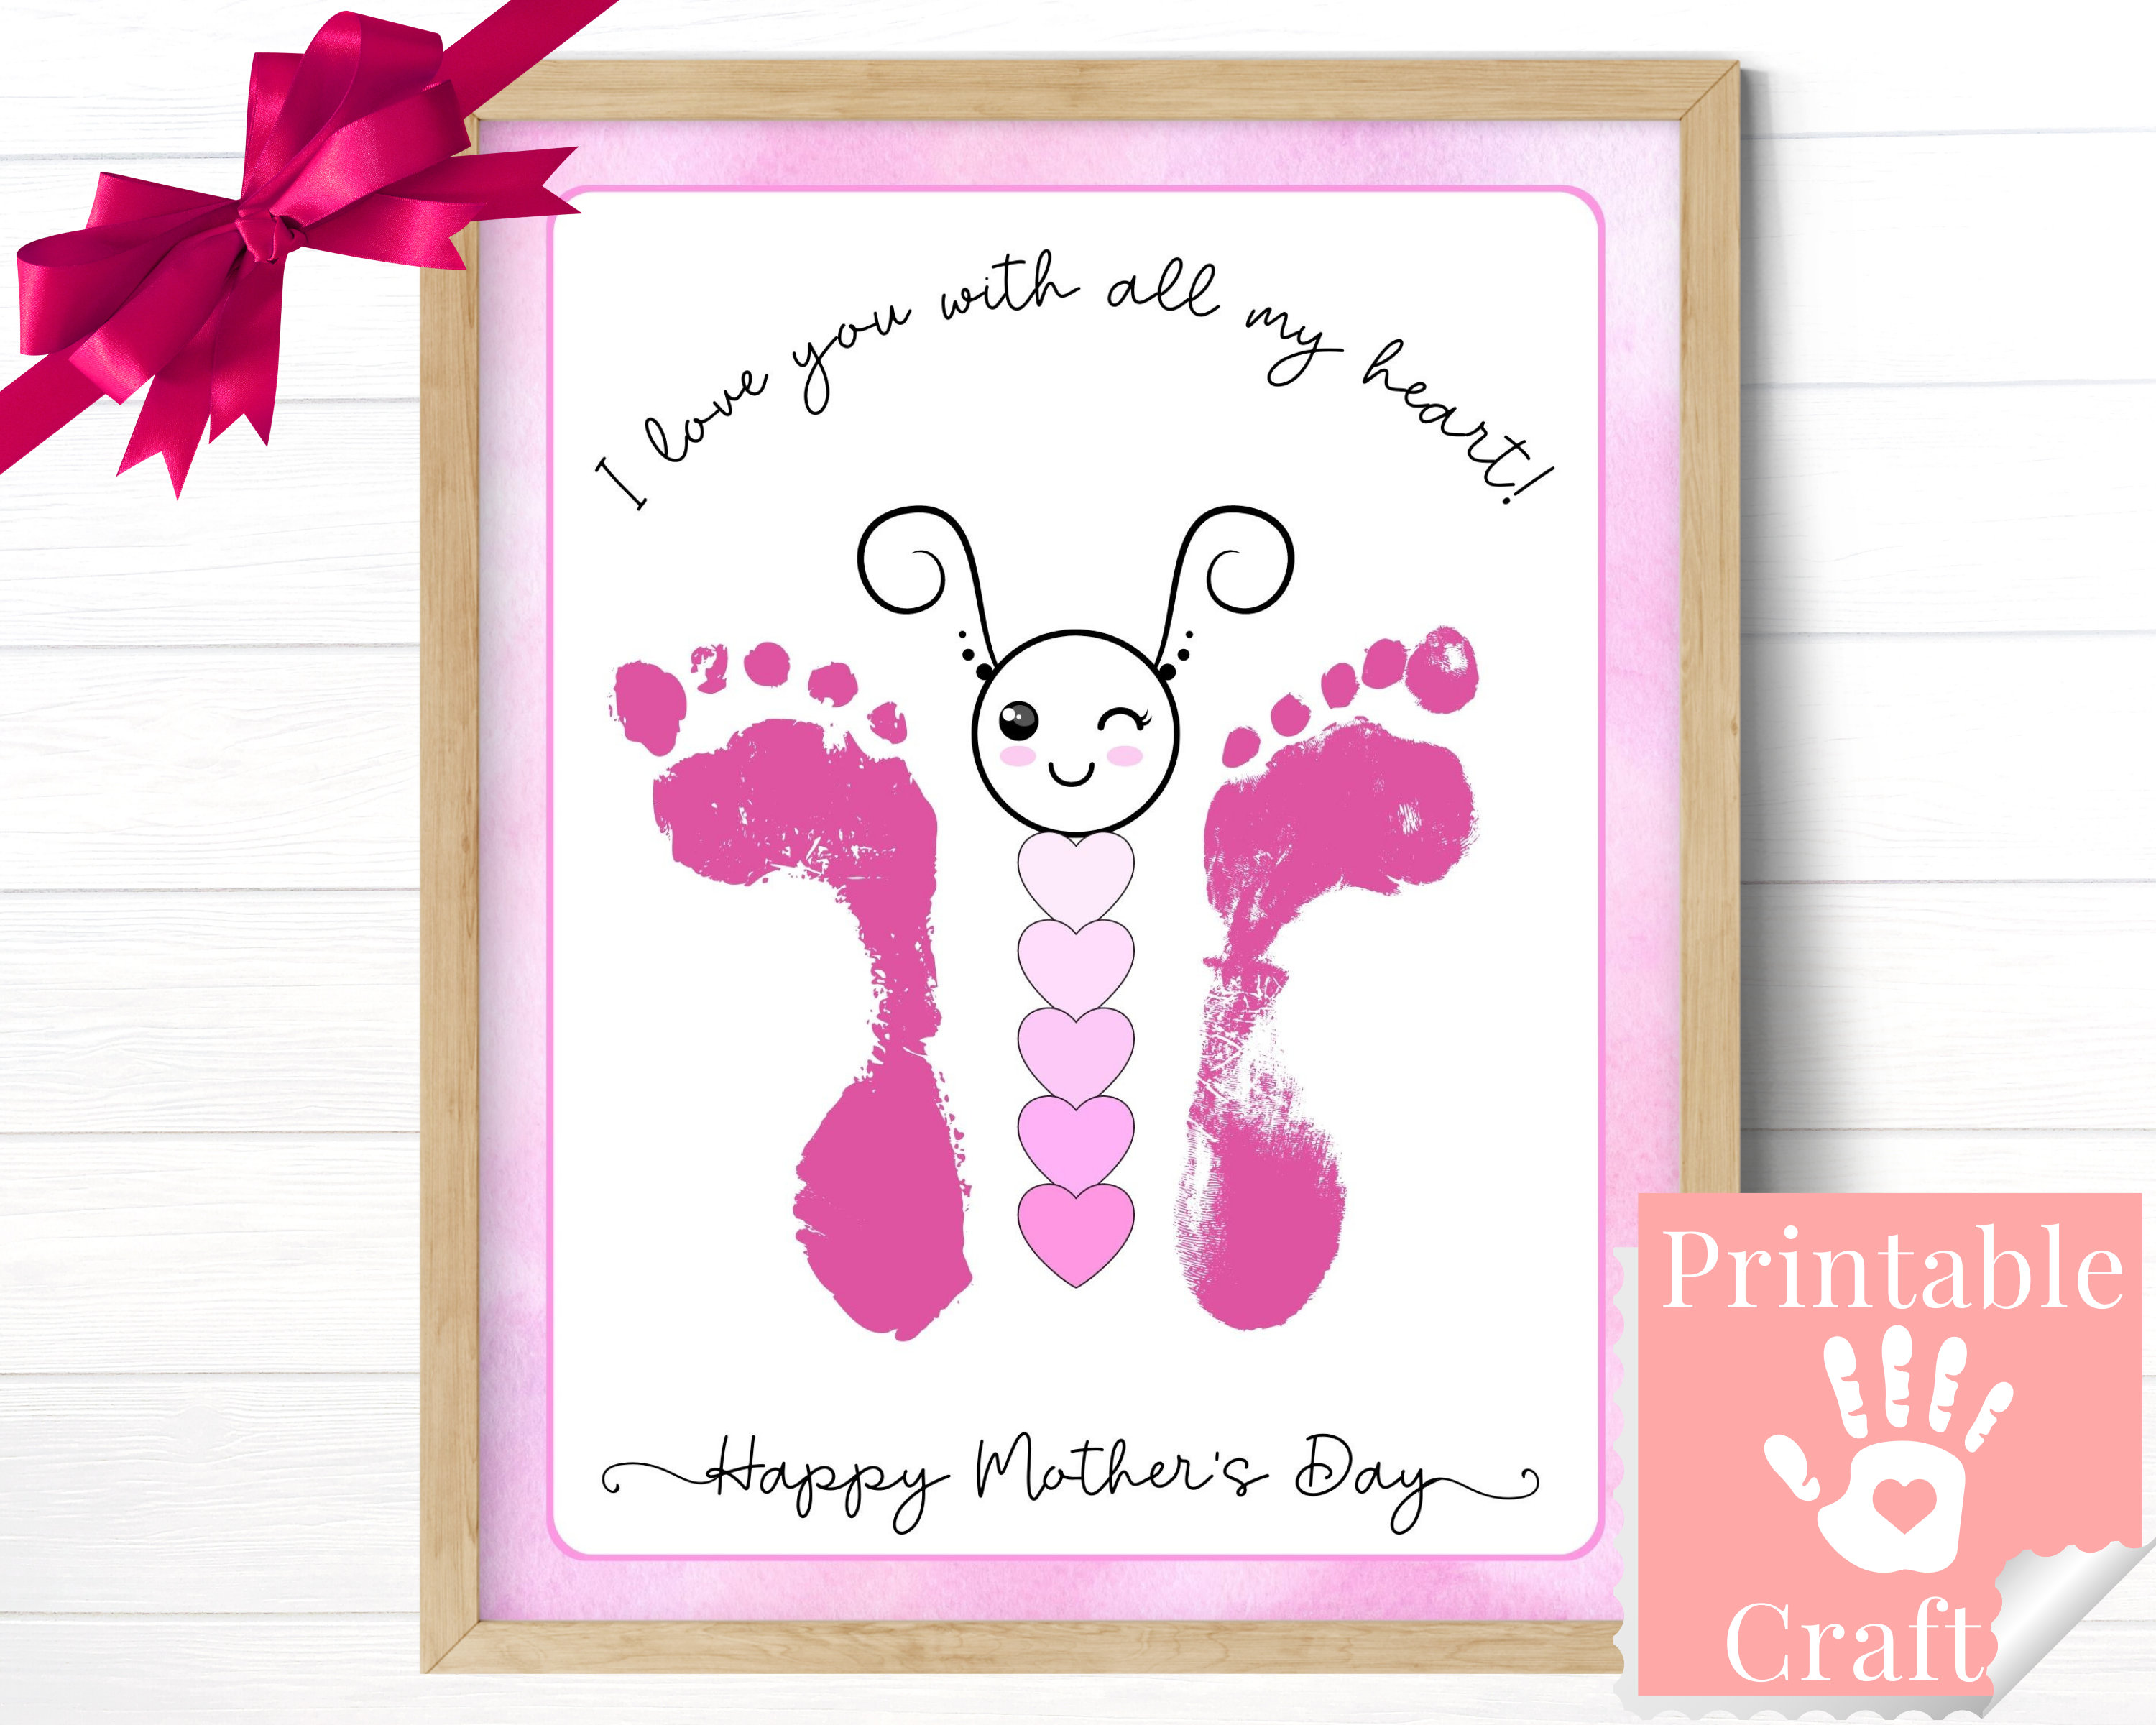 100 Thoughtful Sweet Mother's Day Crafts For Kids  Diy mother's day  crafts, Diy birthday gifts for mom, Mothers day crafts for kids